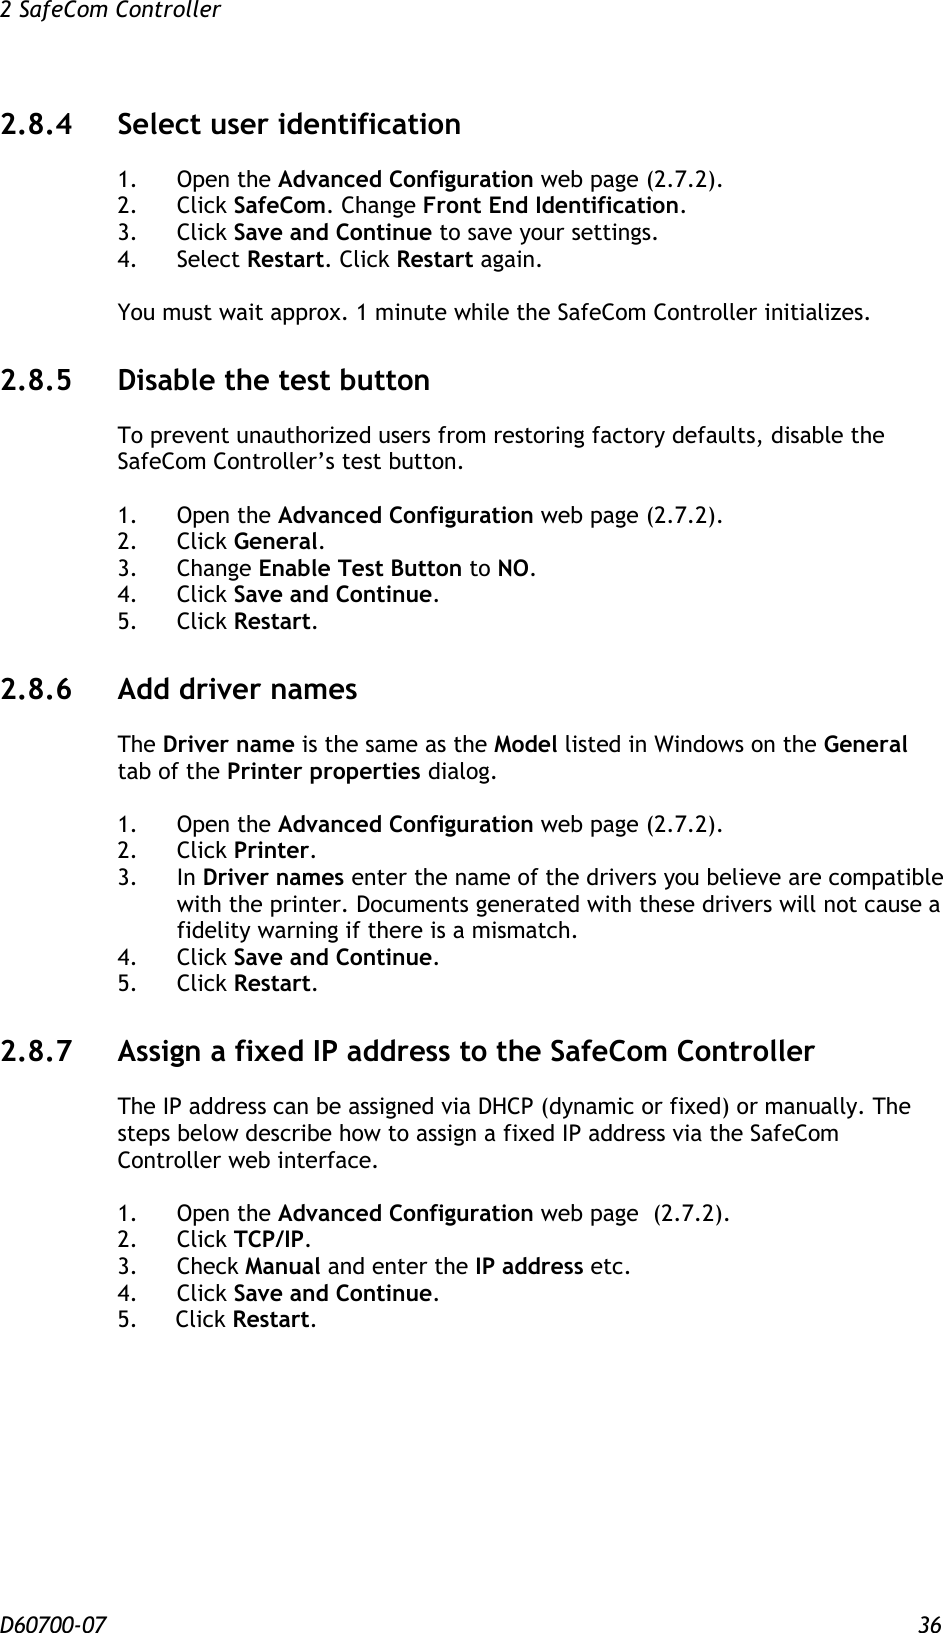 2 SafeCom Controller  D60700-07 36 2.8.4 Select user identification  1.  Open the Advanced Configuration web page (2.7.2). 2.  Click SafeCom. Change Front End Identification. 3.  Click Save and Continue to save your settings. 4.  Select Restart. Click Restart again.  You must wait approx. 1 minute while the SafeCom Controller initializes. 2.8.5 Disable the test button To prevent unauthorized users from restoring factory defaults, disable the SafeCom Controller’s test button.  1.  Open the Advanced Configuration web page (2.7.2). 2.  Click General. 3.  Change Enable Test Button to NO. 4.  Click Save and Continue. 5.  Click Restart. 2.8.6 Add driver names The Driver name is the same as the Model listed in Windows on the General tab of the Printer properties dialog.  1.  Open the Advanced Configuration web page (2.7.2). 2.  Click Printer. 3.  In Driver names enter the name of the drivers you believe are compatible with the printer. Documents generated with these drivers will not cause a fidelity warning if there is a mismatch. 4.  Click Save and Continue. 5.  Click Restart. 2.8.7 Assign a fixed IP address to the SafeCom Controller The IP address can be assigned via DHCP (dynamic or fixed) or manually. The steps below describe how to assign a fixed IP address via the SafeCom Controller web interface.  1.  Open the Advanced Configuration web page  (2.7.2). 2.  Click TCP/IP. 3.  Check Manual and enter the IP address etc. 4.  Click Save and Continue. 5. Click Restart. 